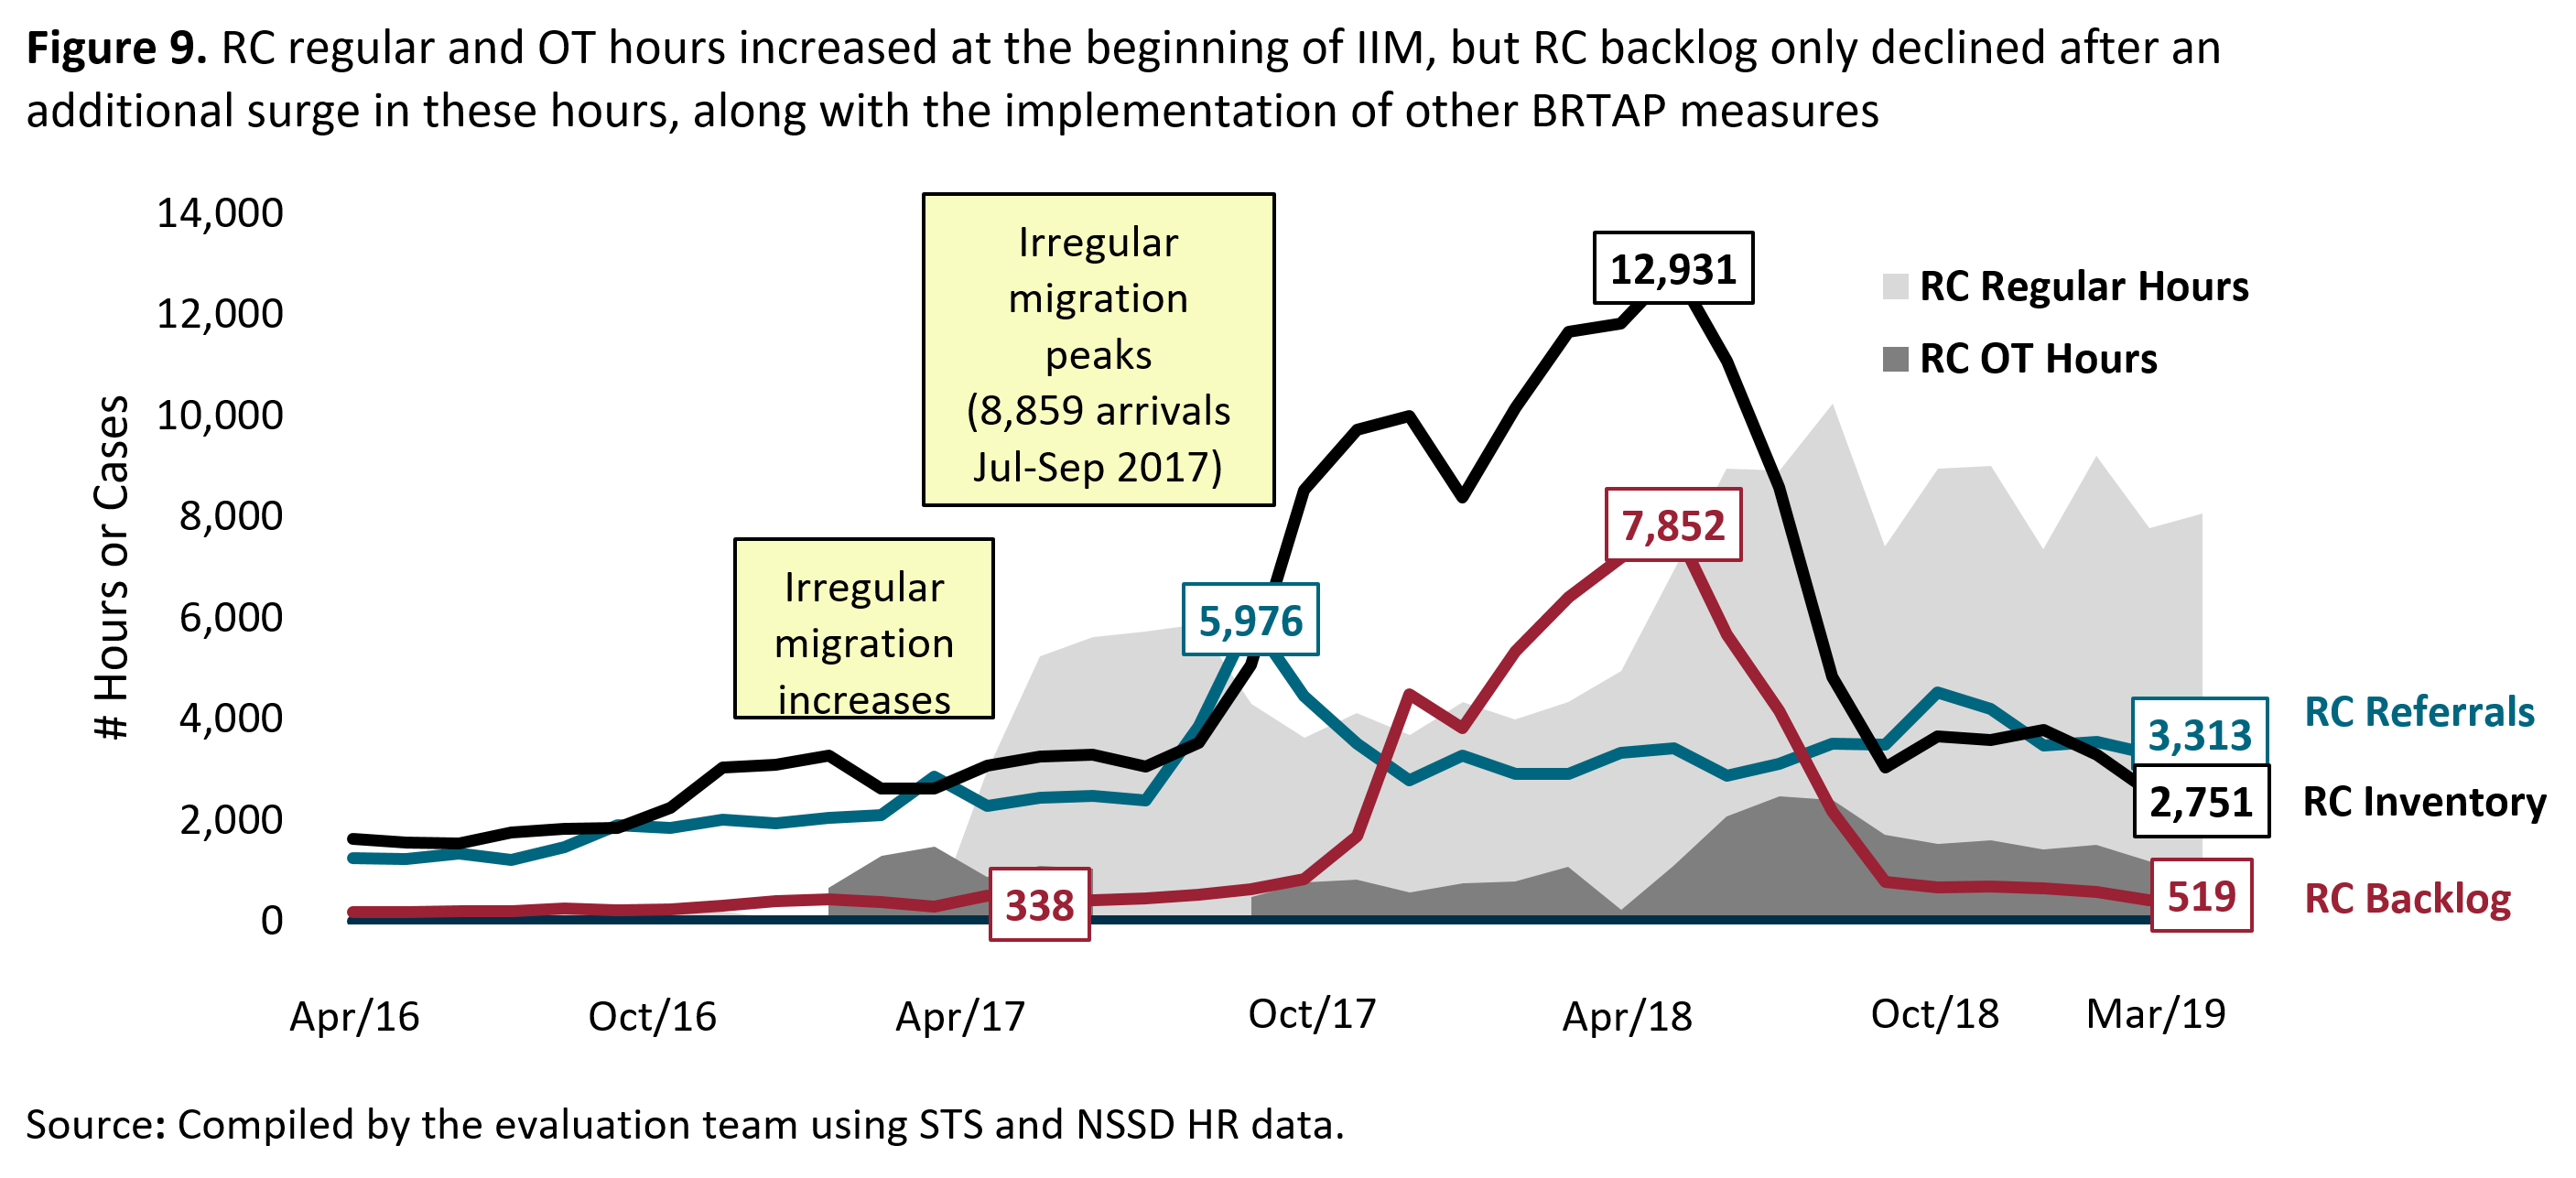 Figure 9. <abbr>RC</abbr> regular and <abbr>OT</abbr> hours increased at the beginning of <abbr>IIM</abbr>, but <abbr>RC</abbr> backlog only declined after an additional surge in these hours, along with the implementation of other <abbr>BRTAP</abbr> measures